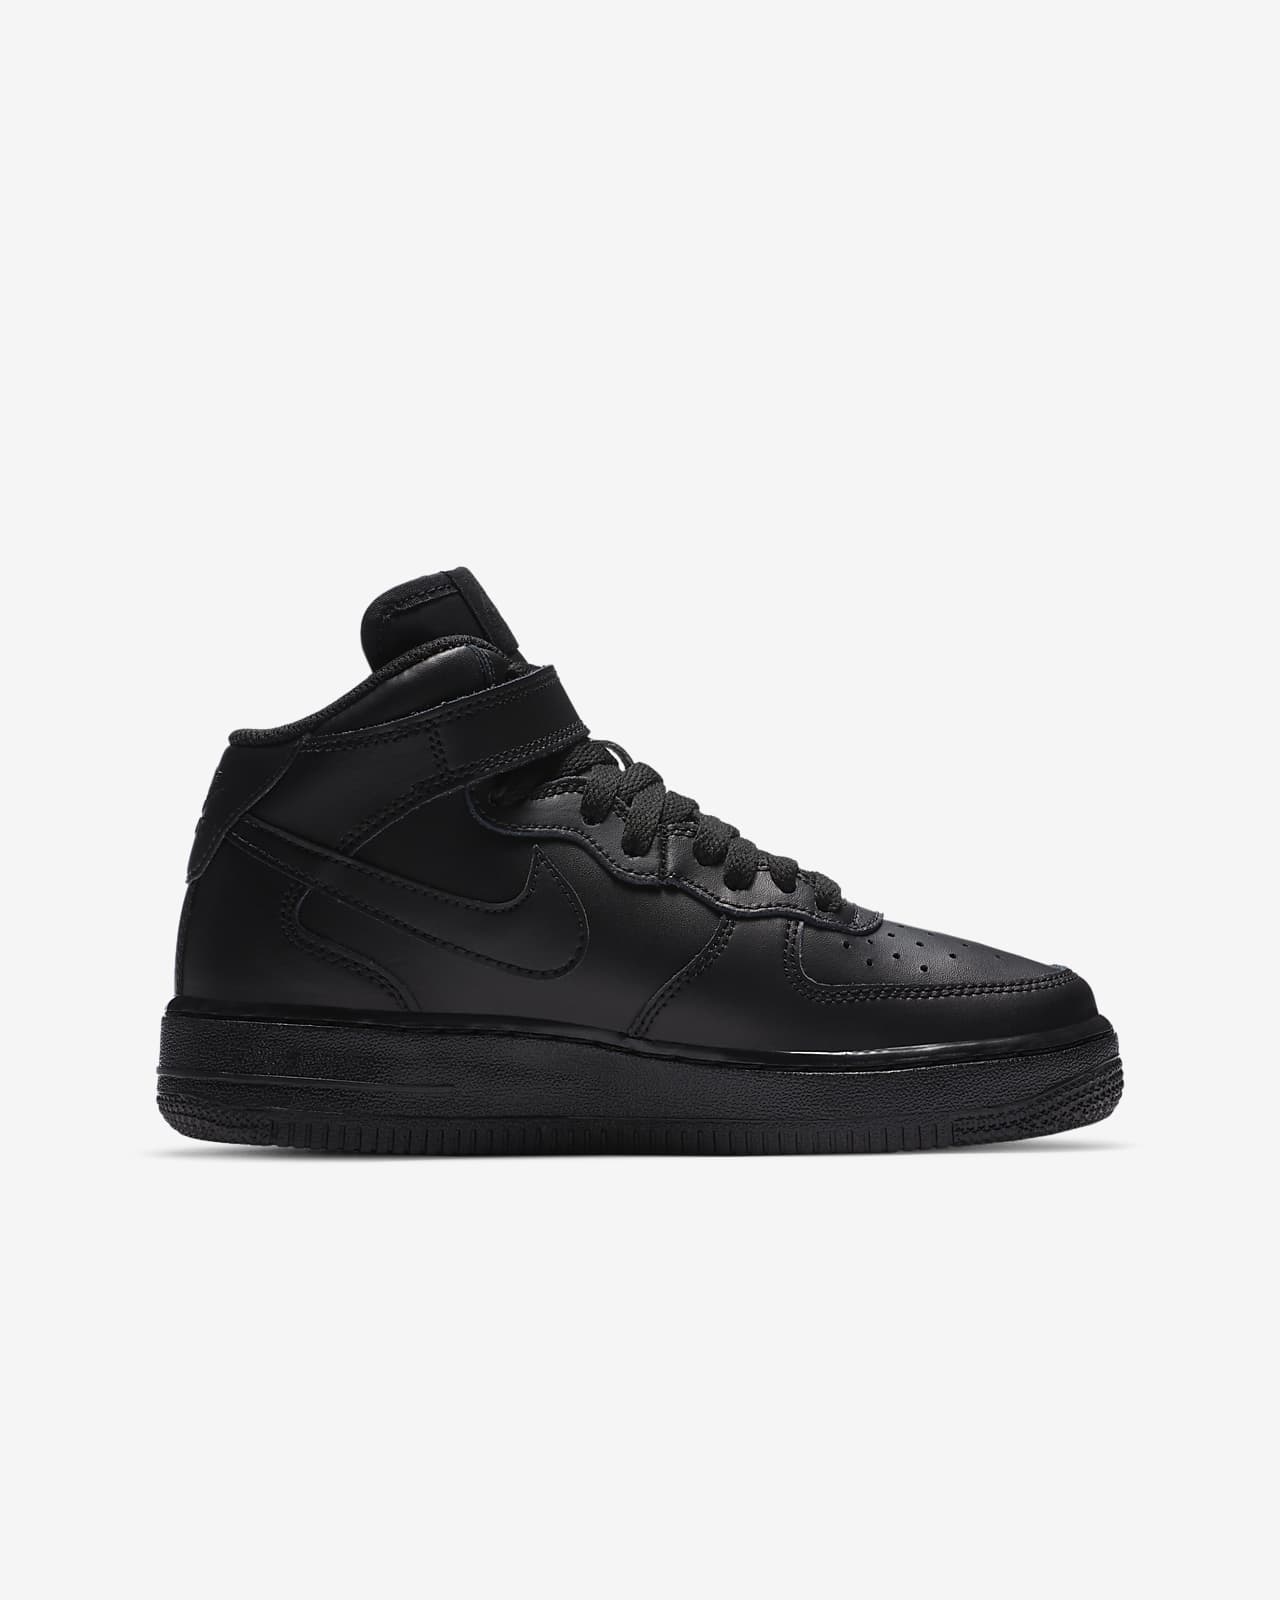 size 6.5 nike air force 1